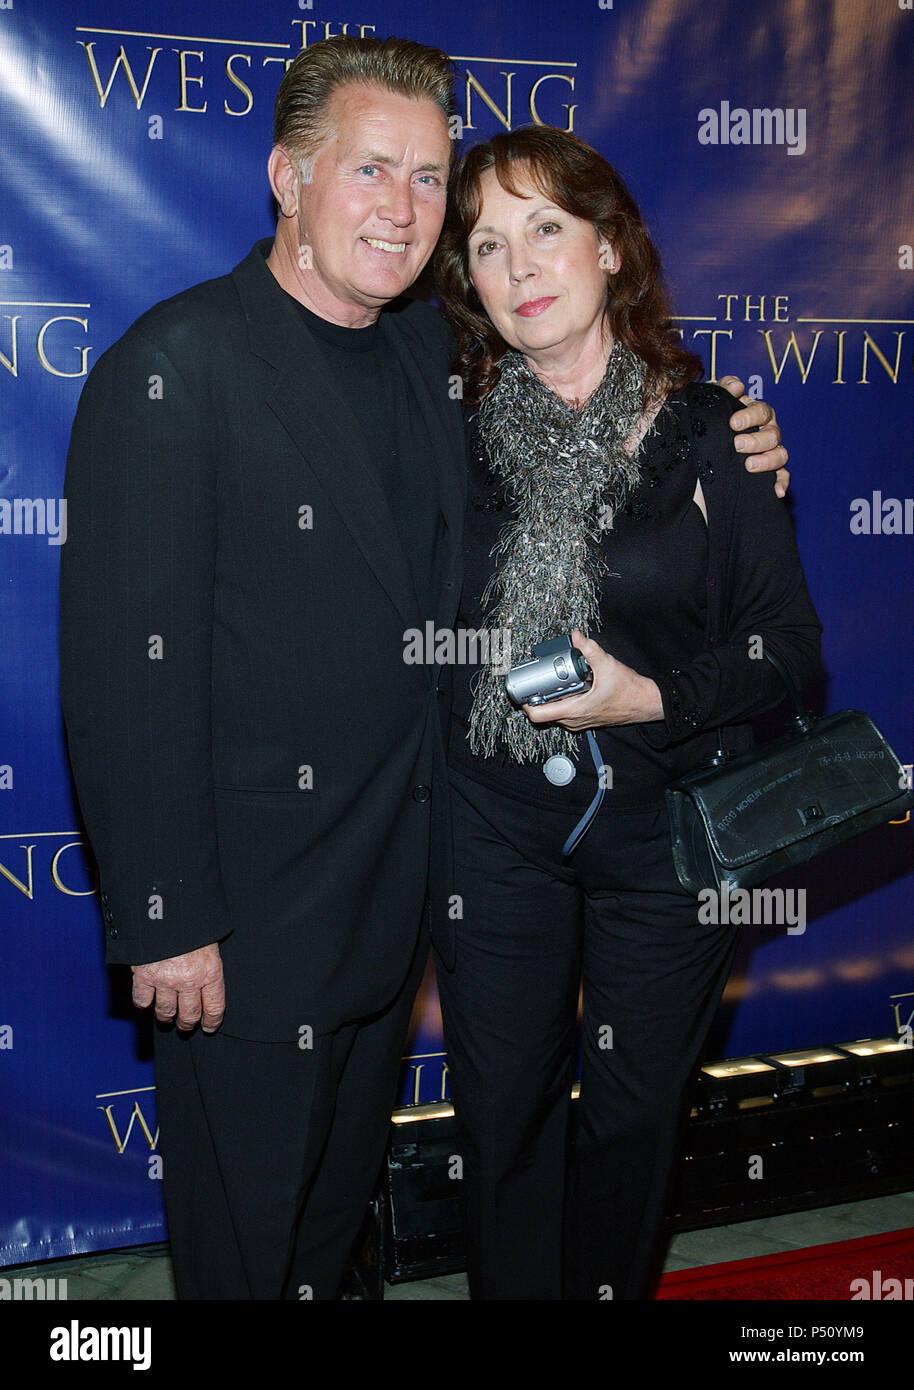 Martin Sheen and wife arriving at the party celebrating the   ' West Wing 100th Episode ' at the Four seasons Hotel in Los Angeles. November 1st 2003.           -            SheenMartin wife29.jpgSheenMartin wife29  Event in Hollywood Life - California, Red Carpet Event, USA, Film Industry, Celebrities, Photography, Bestof, Arts Culture and Entertainment, Topix Celebrities fashion, Best of, Hollywood Life, Event in Hollywood Life - California,  backstage trophy, Awards show, movie celebrities, TV celebrities, Music celebrities, Topix, Bestof, Arts Culture and Entertainment, Photography,    inq Stock Photo